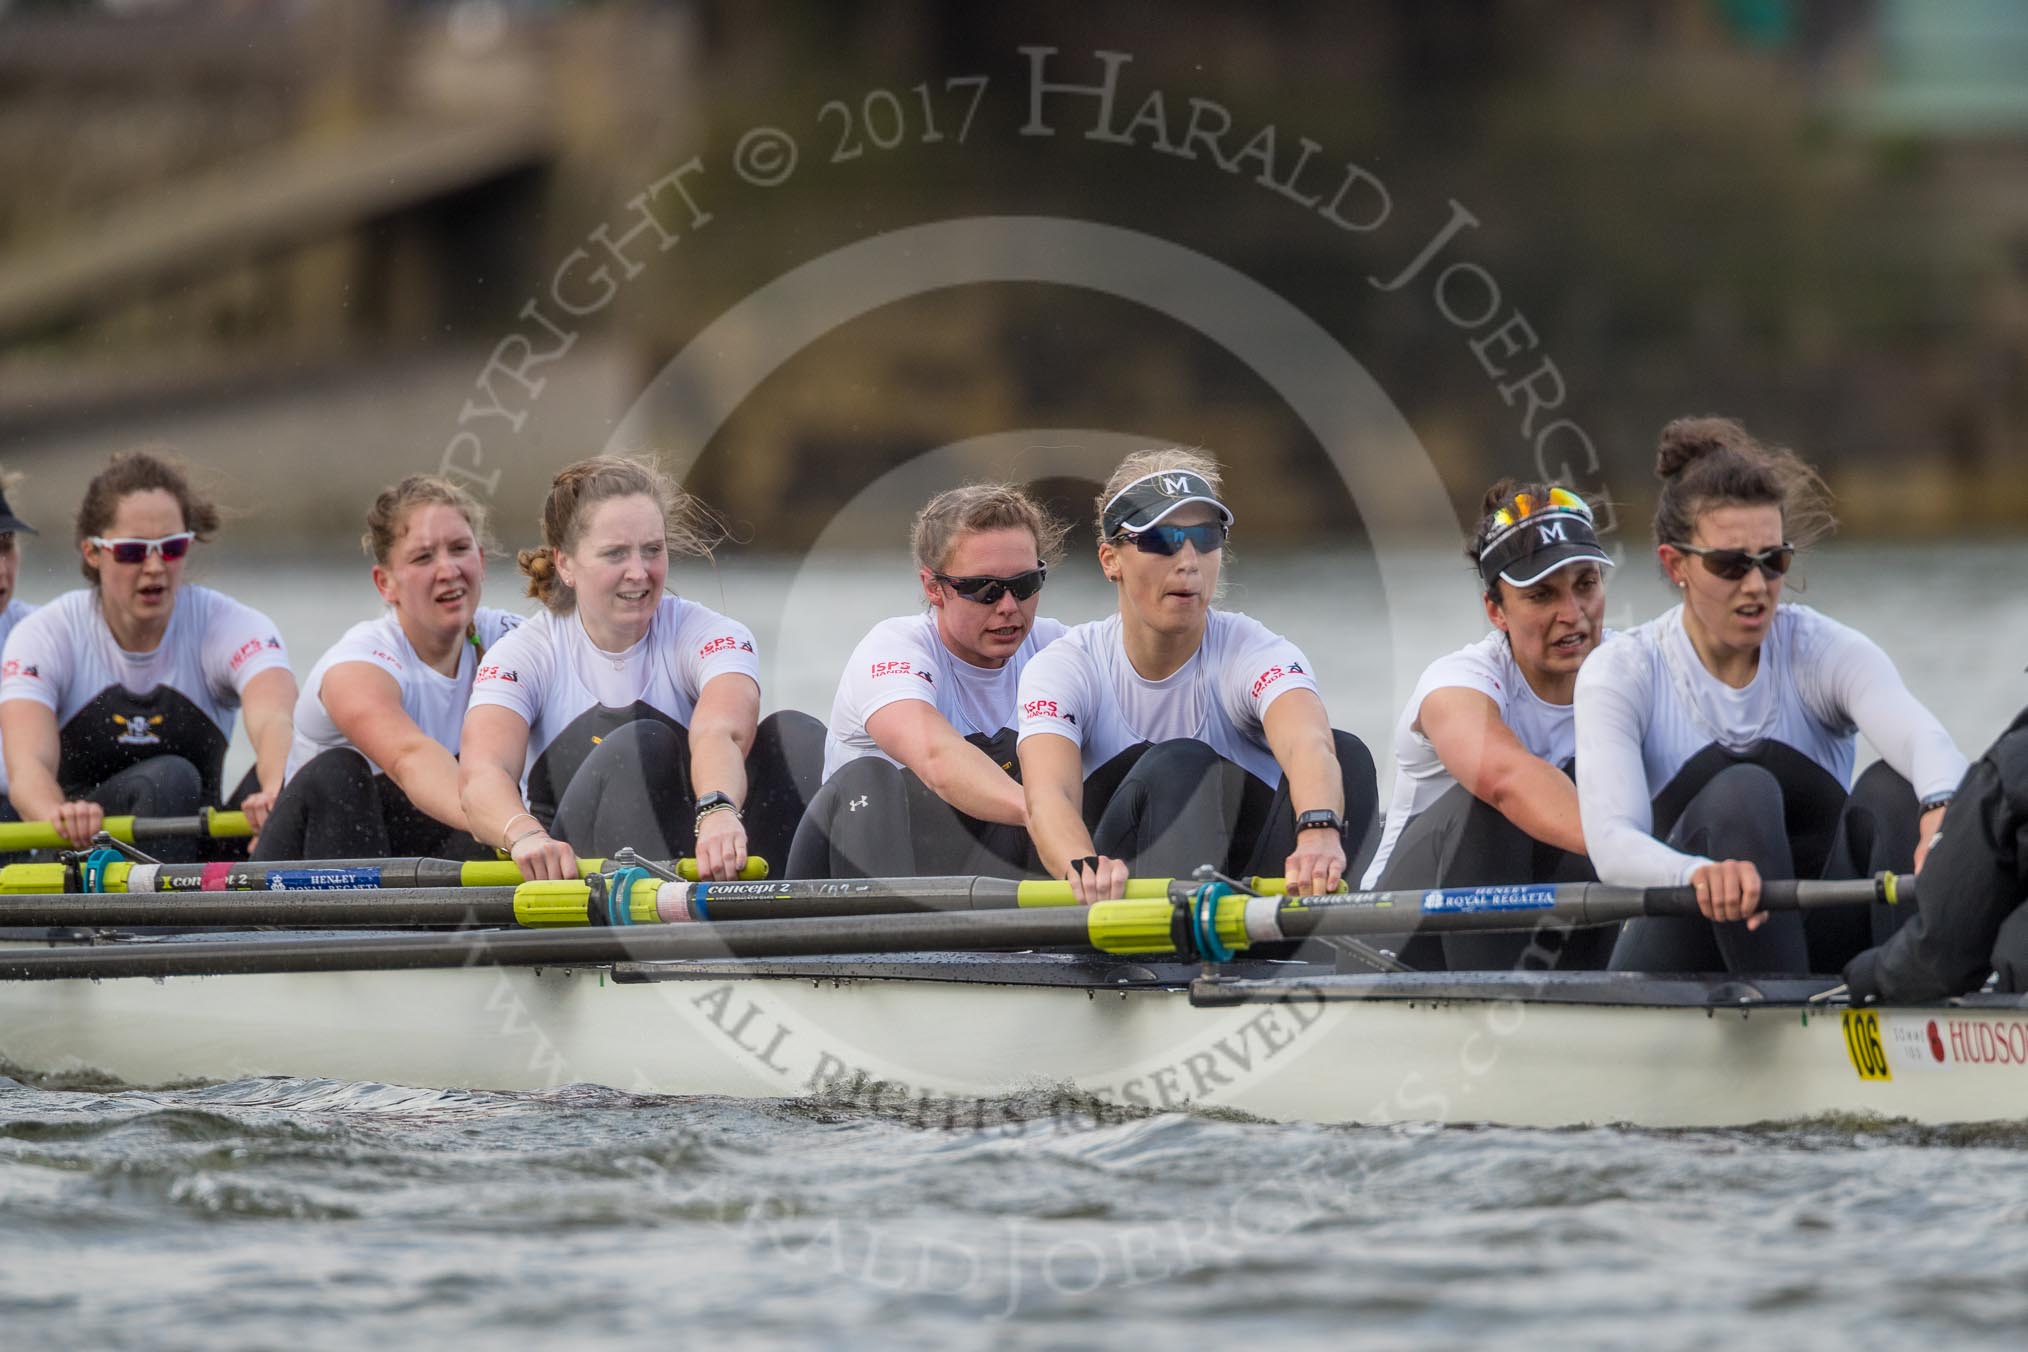 The Cancer Research UK Boat Race season 2017 - Women's Boat Race Fixture OUWBC vs Molesey BC: The Molesey boat, here 2 Caitlin Boyland, 3 Lucy Primmer, 4 Claire McKeown, 5 Katie Bartlett, 6 Elo Luik, 7 Gabriella Rodriguez, stroke Ruth Whyman.
River Thames between Putney Bridge and Mortlake,
London SW15,

United Kingdom,
on 19 March 2017 at 16:07, image #101